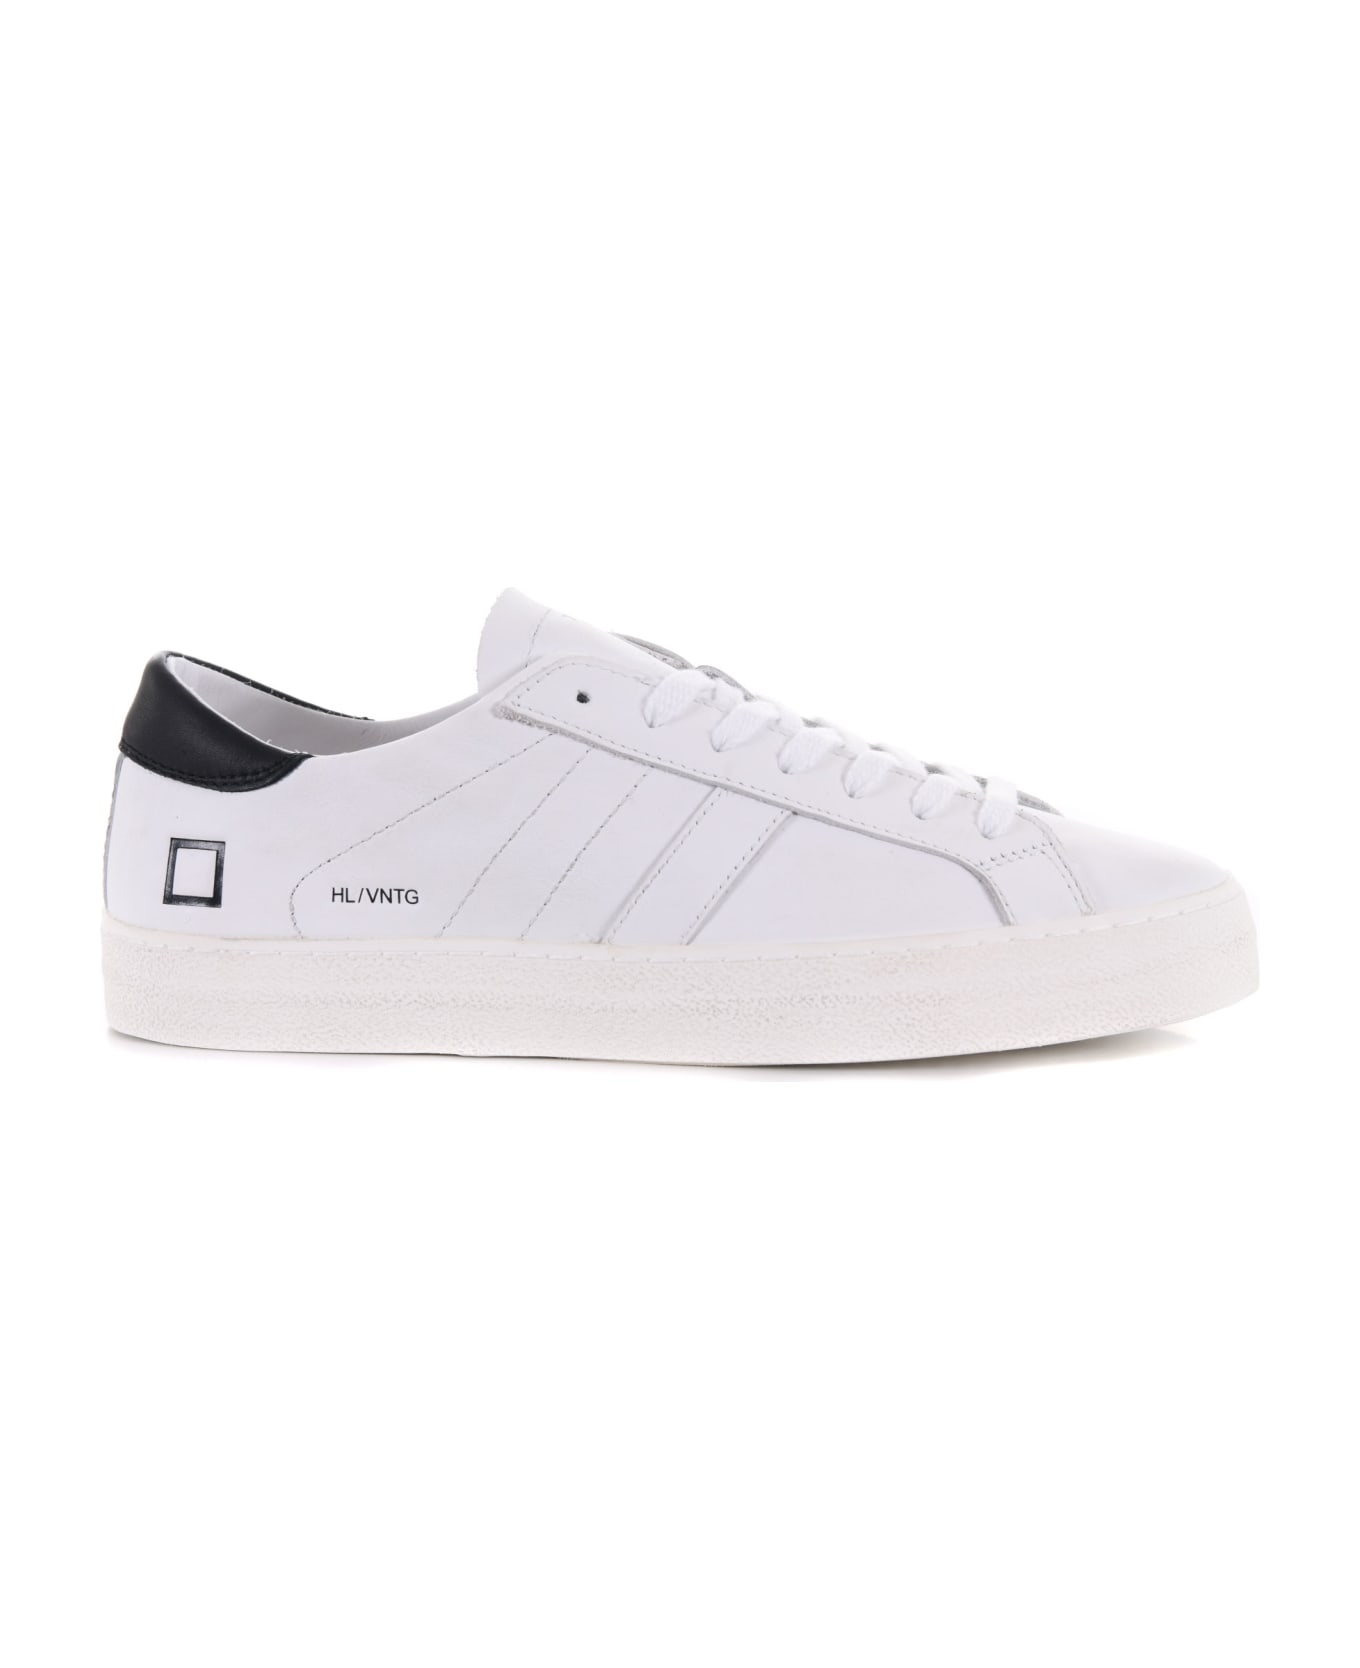 D.A.T.E. Men's Sneakers Leather. - Bianco/nero スニーカー